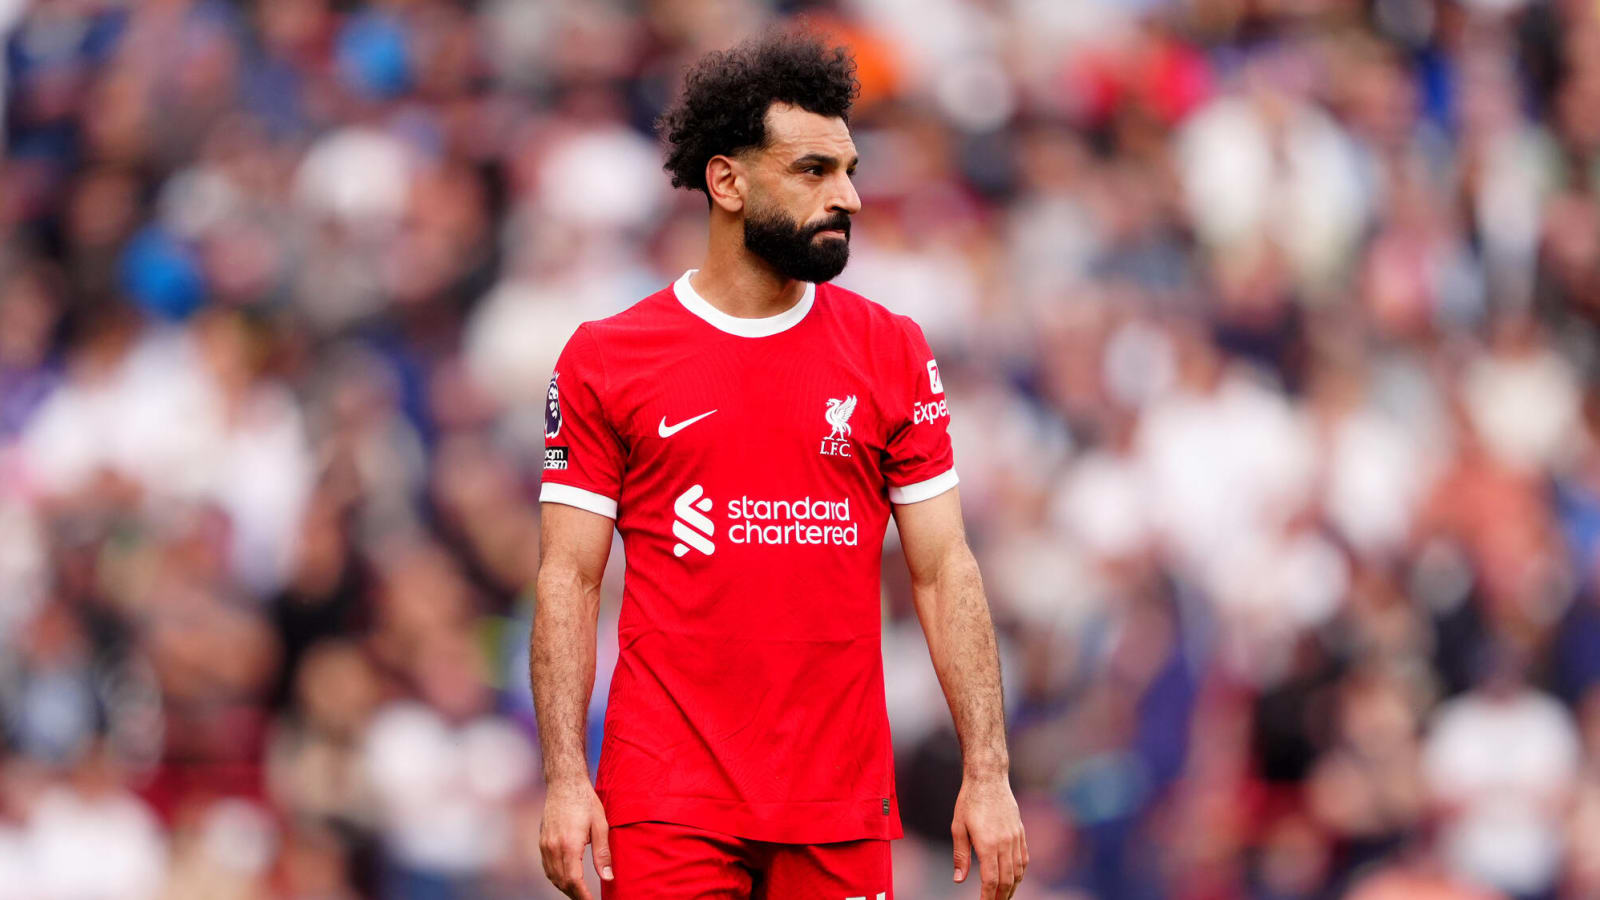 ‘Liverpool would love him’ – Pundit says £60m ‘top player’ could be moulded into Reds’ next Salah